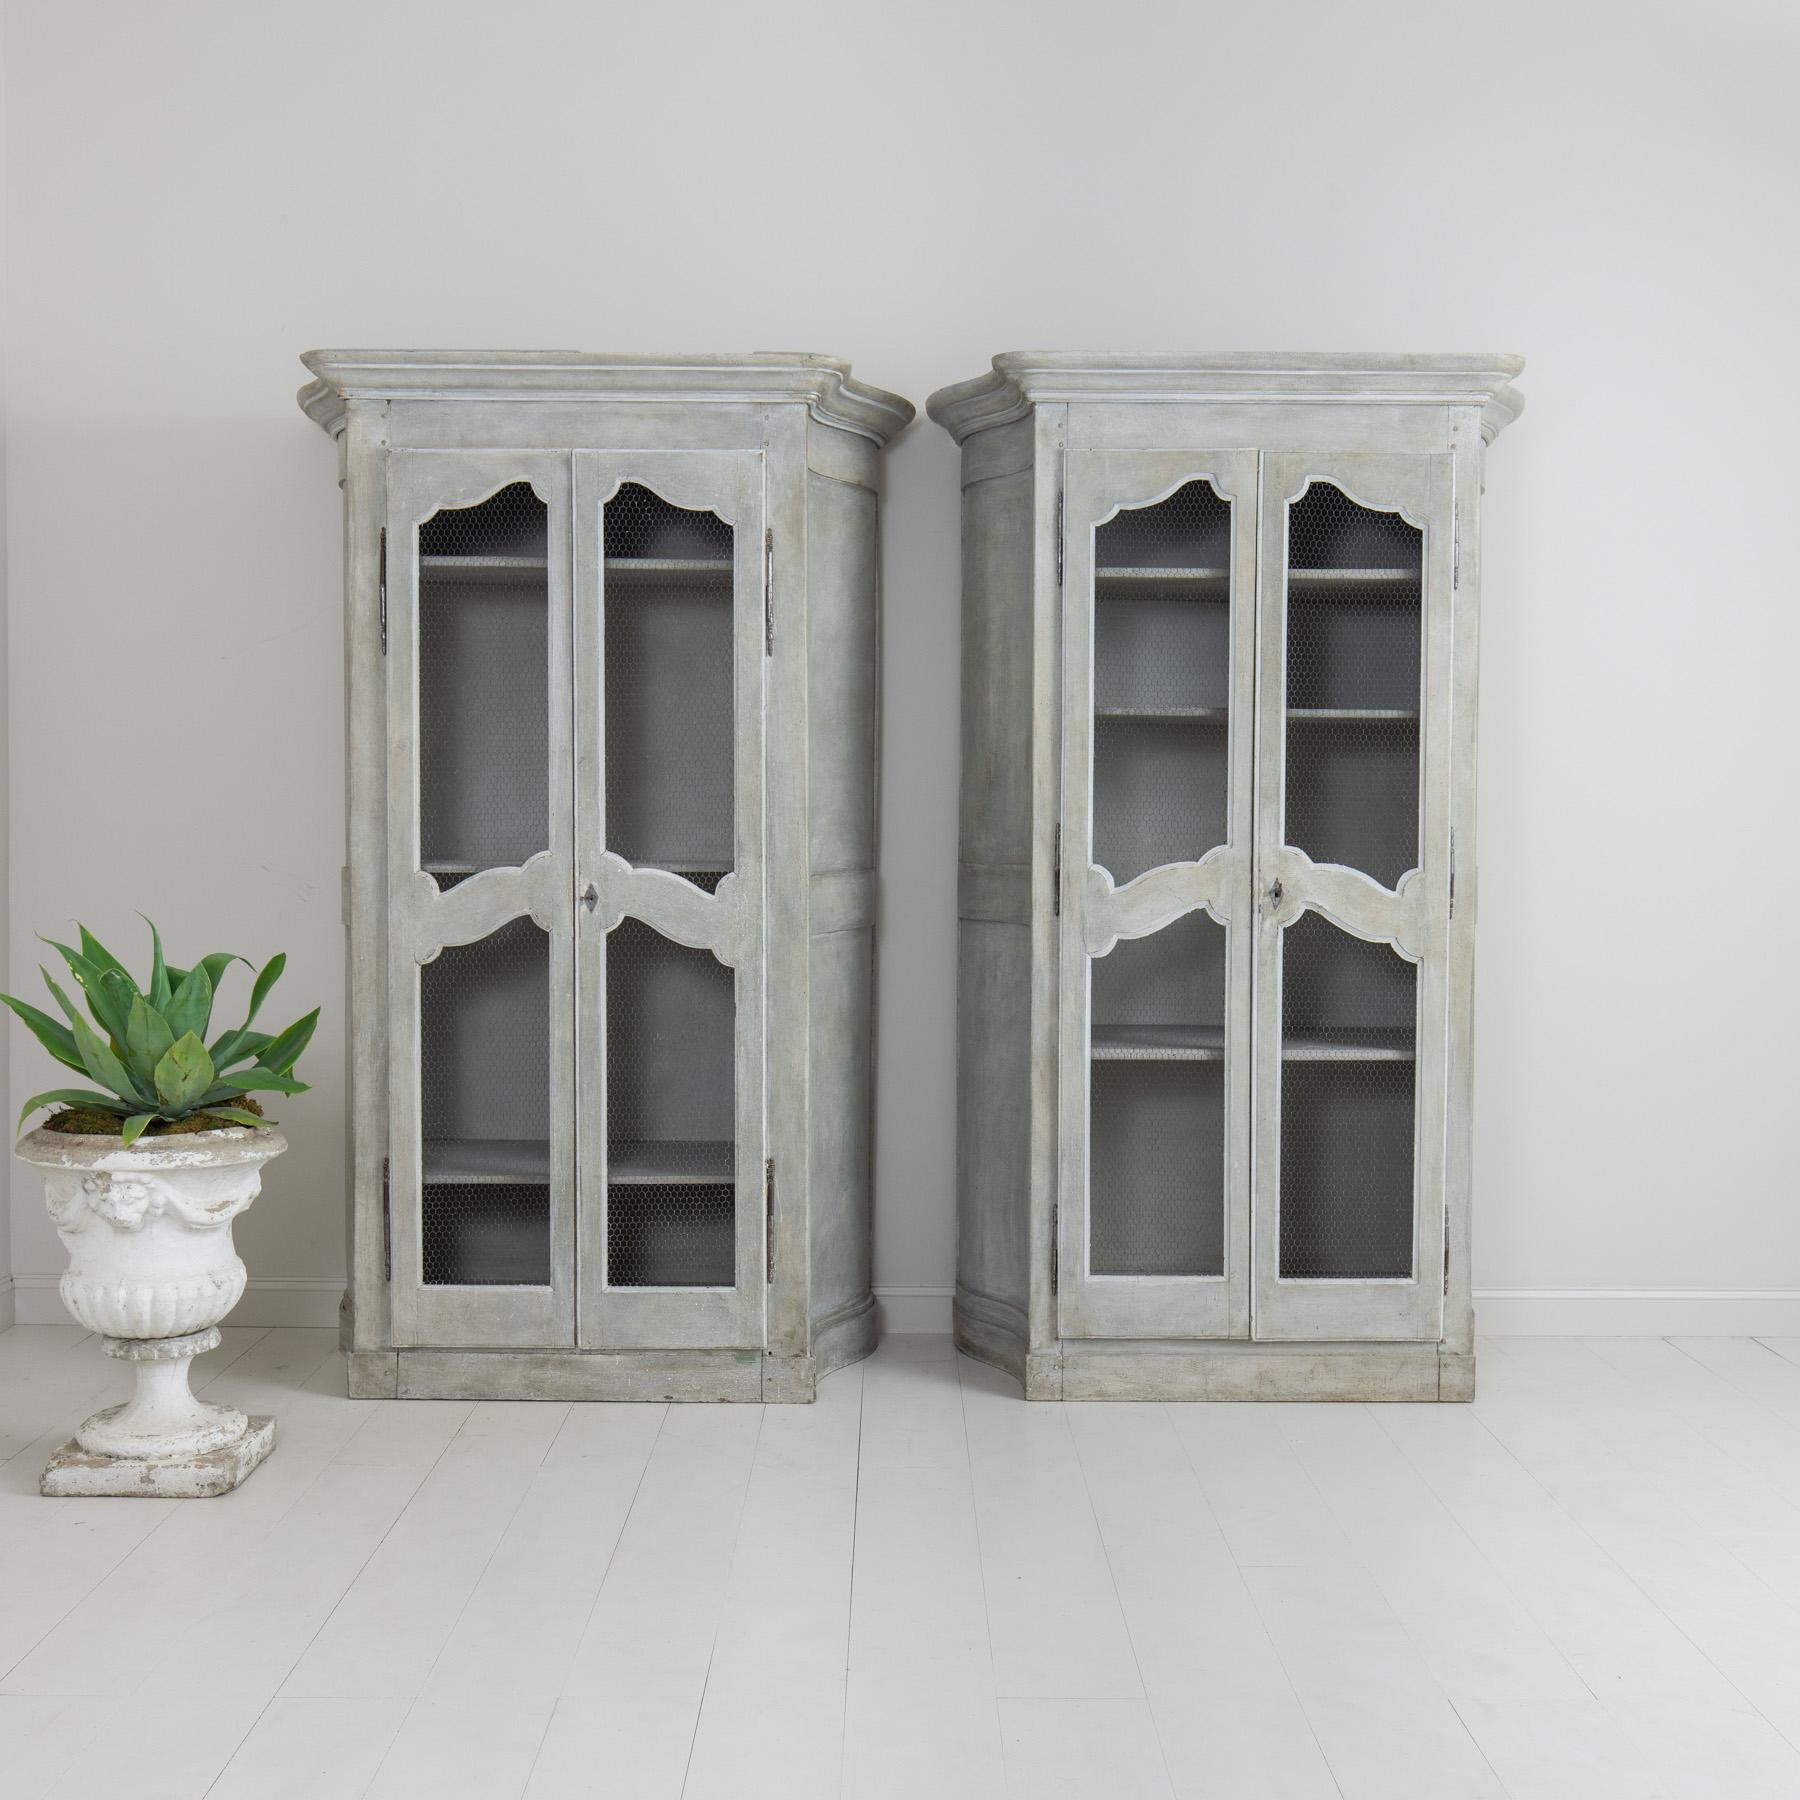 A matched pair of grand, French gray two-door cabinets from the 19th century with wire mesh door fronts and canted serpentine sides, supported by shaped box plinths. Circa 1840. There are three adjustable shelves in each cabinet. The cabinets